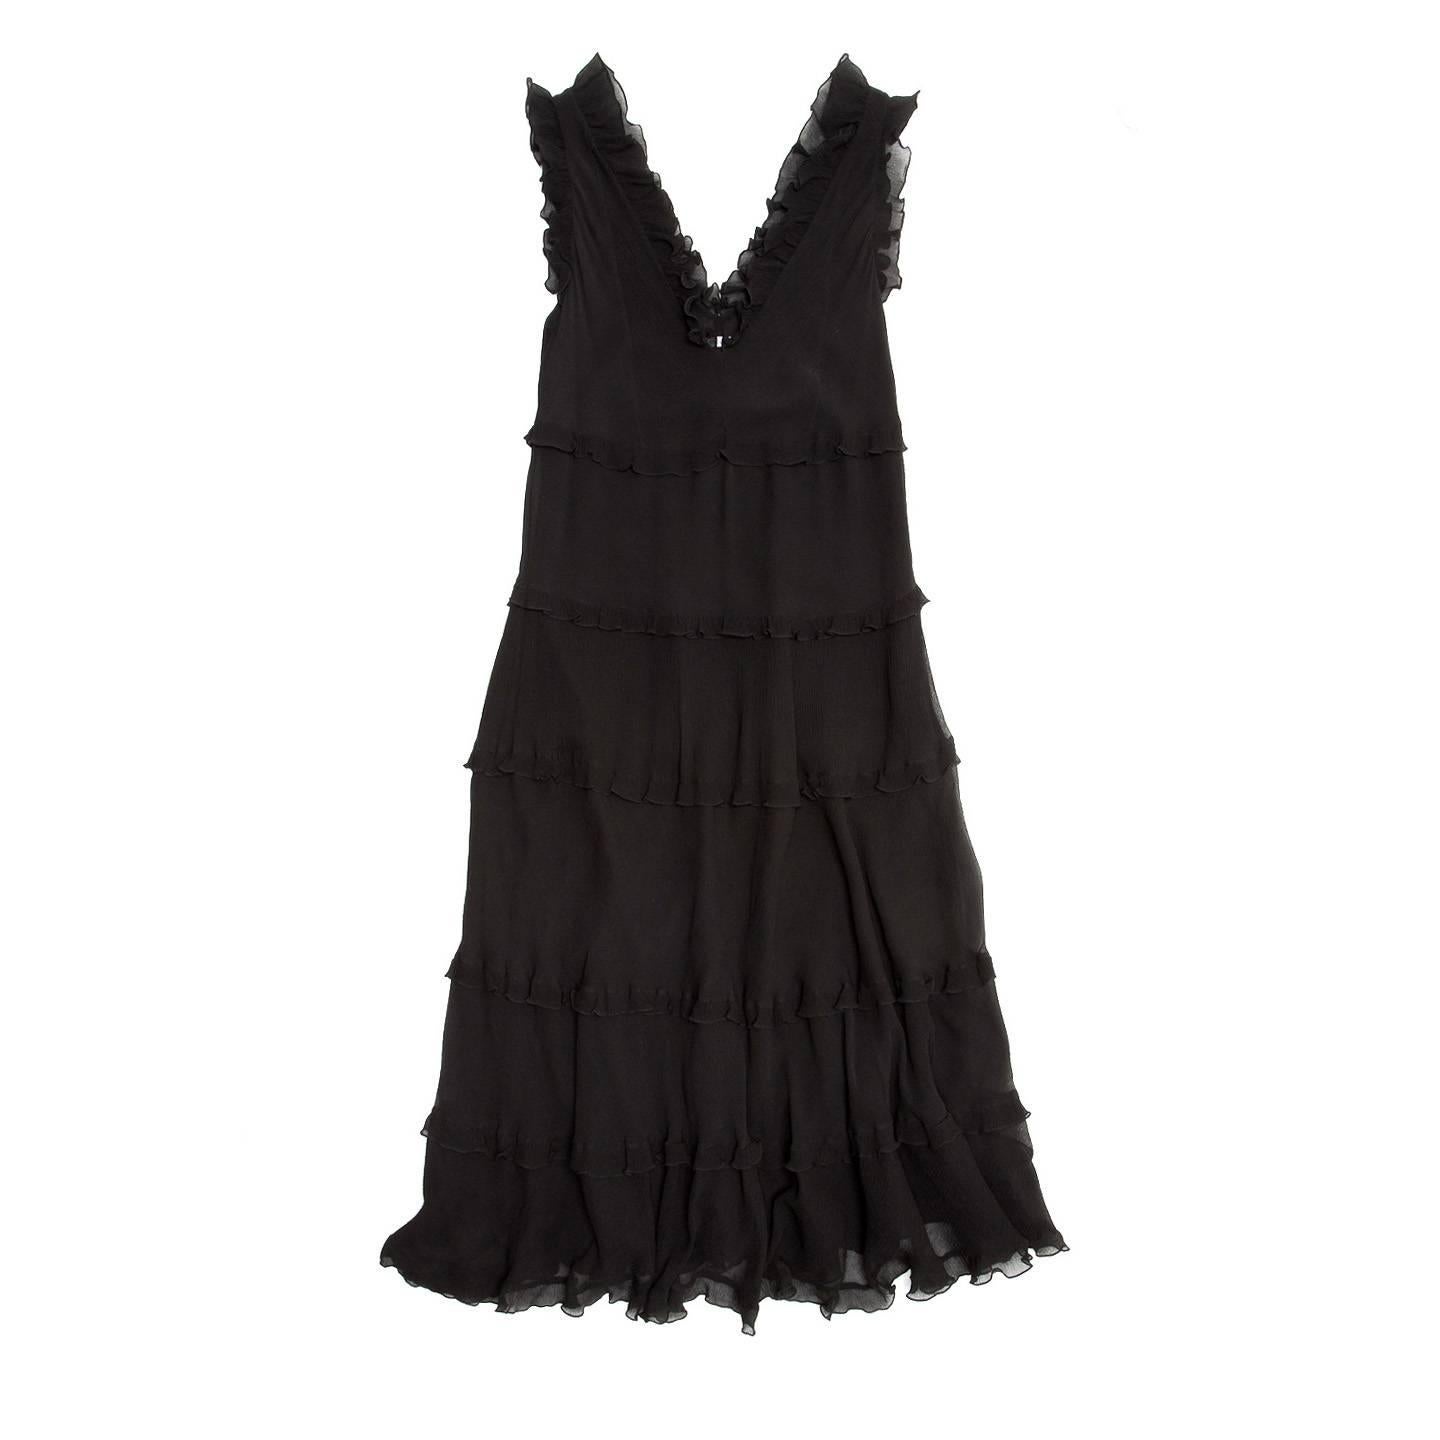 Black crinkle silk chiffon sleeveless dress with tiers and ruffles on each level, hem, around armholes and neck. The dress is ankle length, fully lined, with an A-shape line and a V-neck equally deep at front and back.

Size  44 Italian